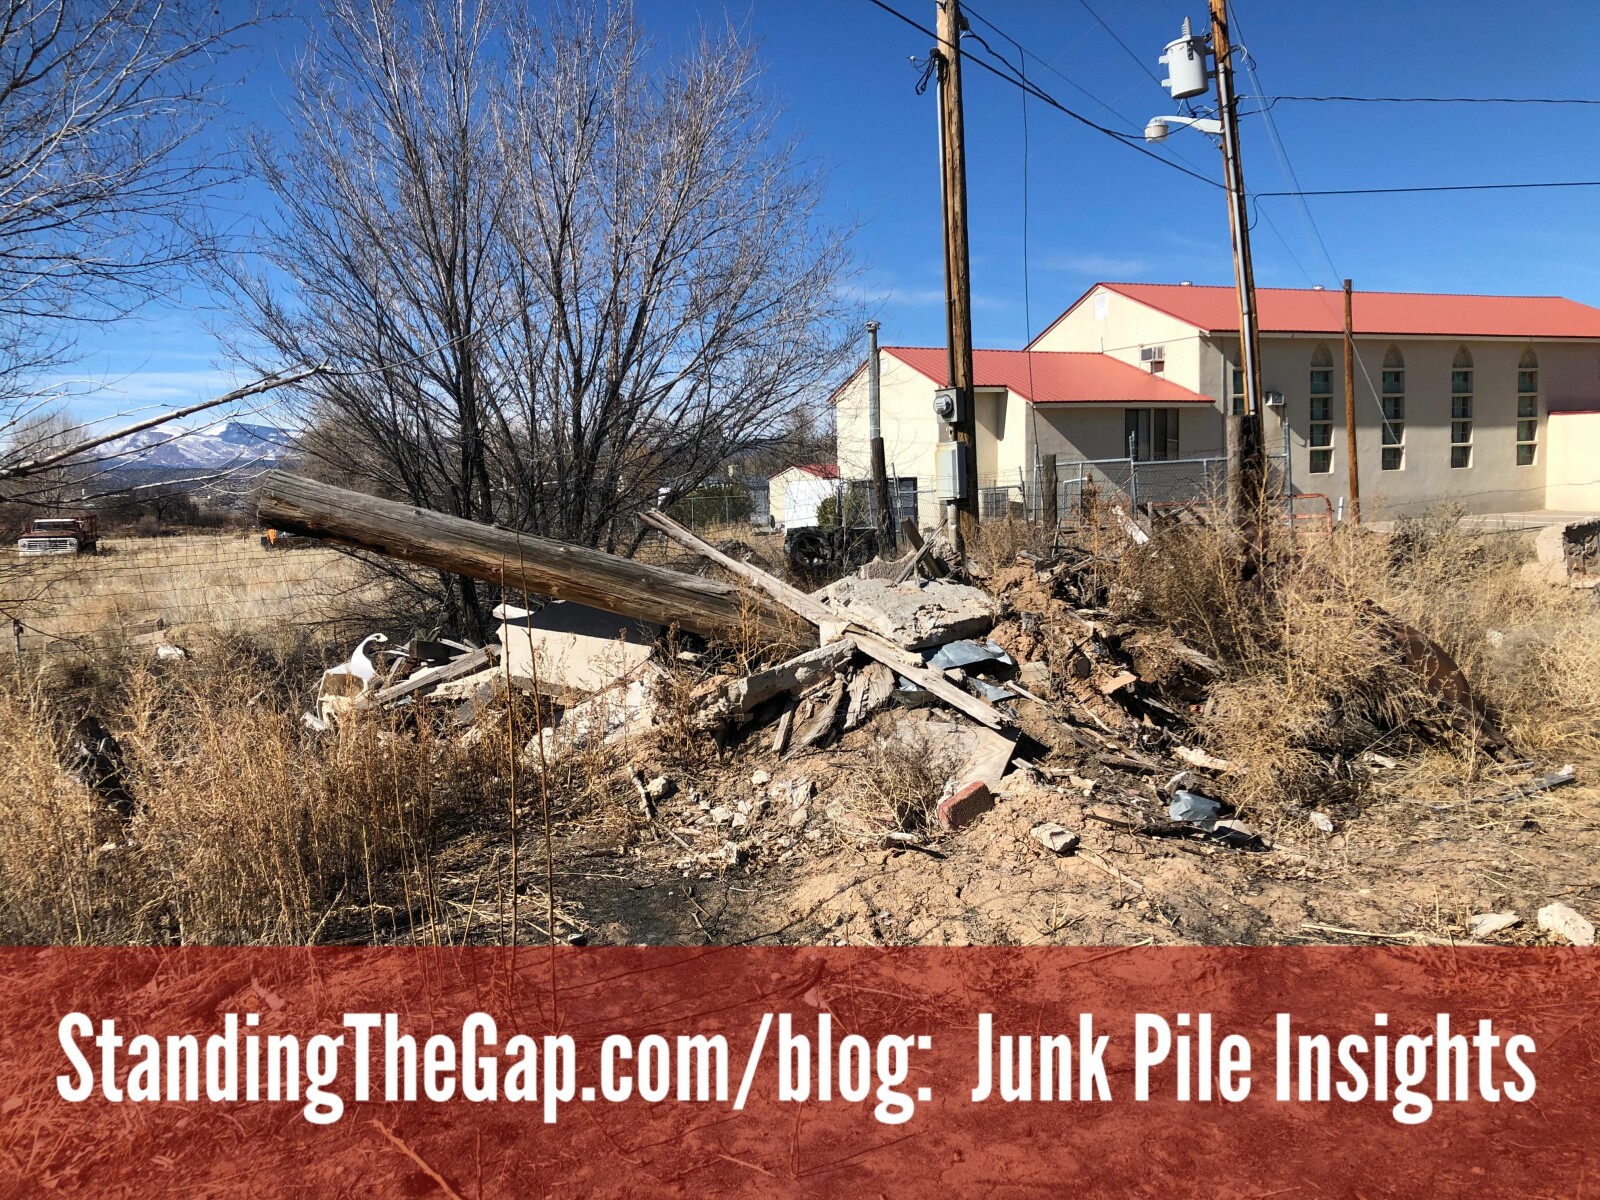 Junk Pile Insights